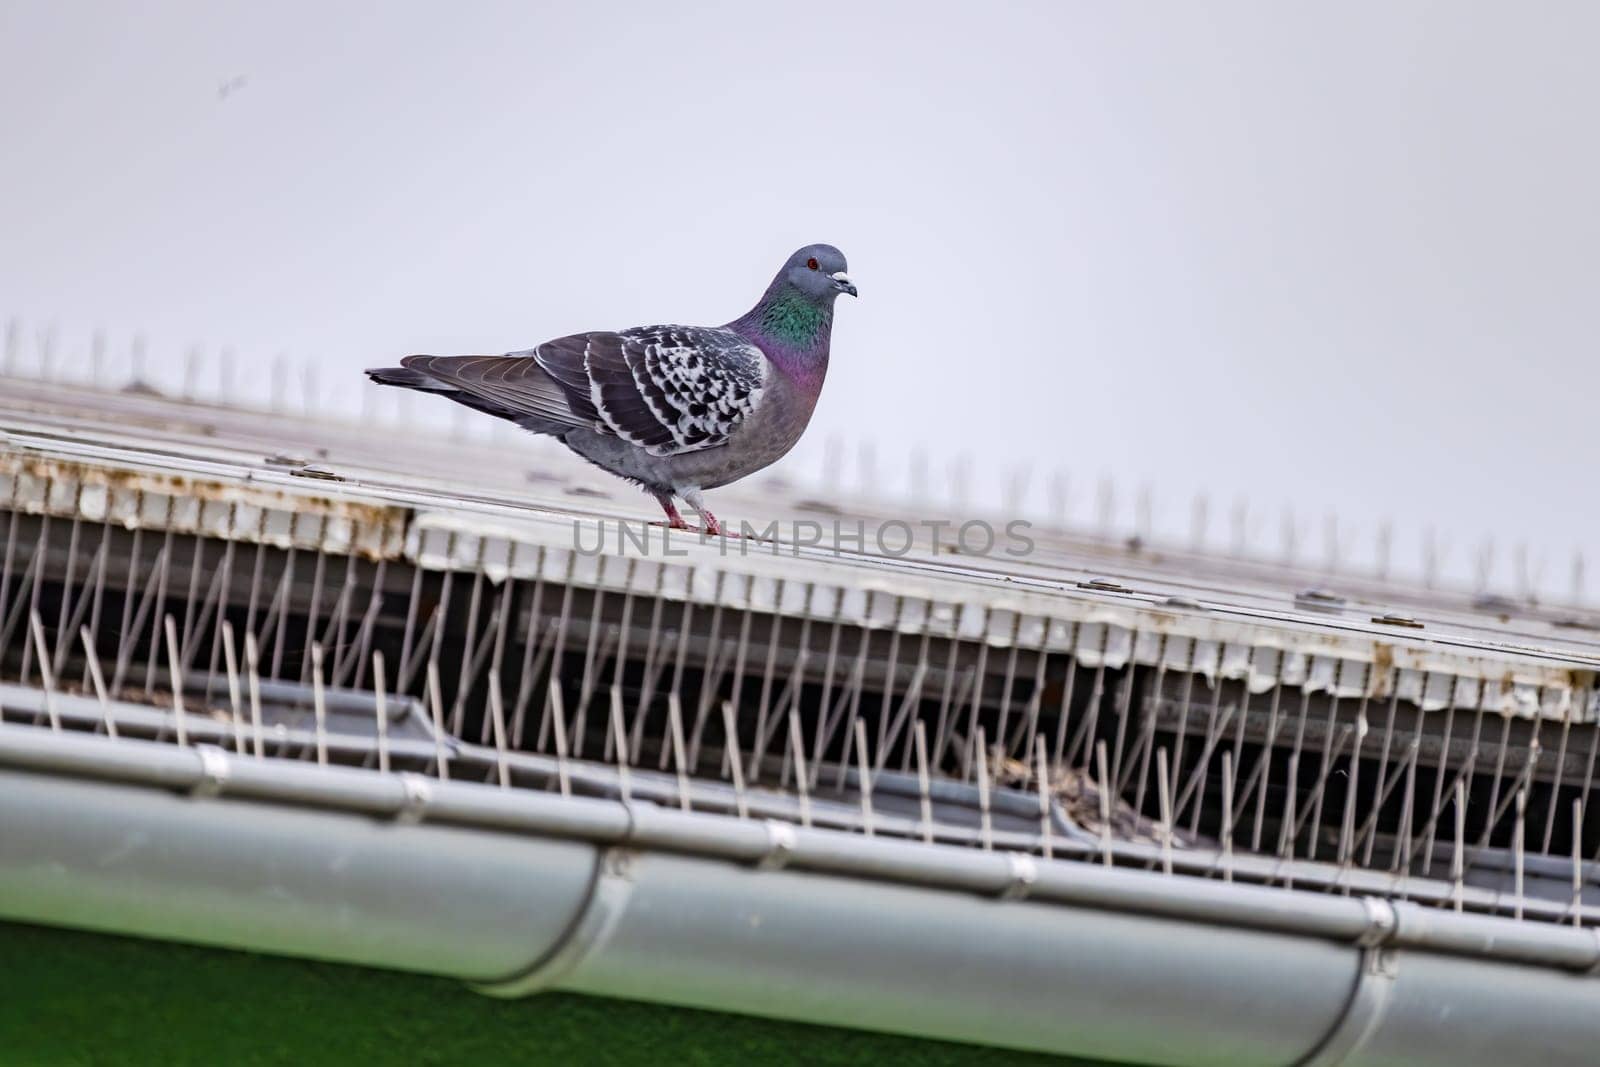 Pigeon sitting on a roof covered with solar panels and spiked to repel pigeons by astrosoft